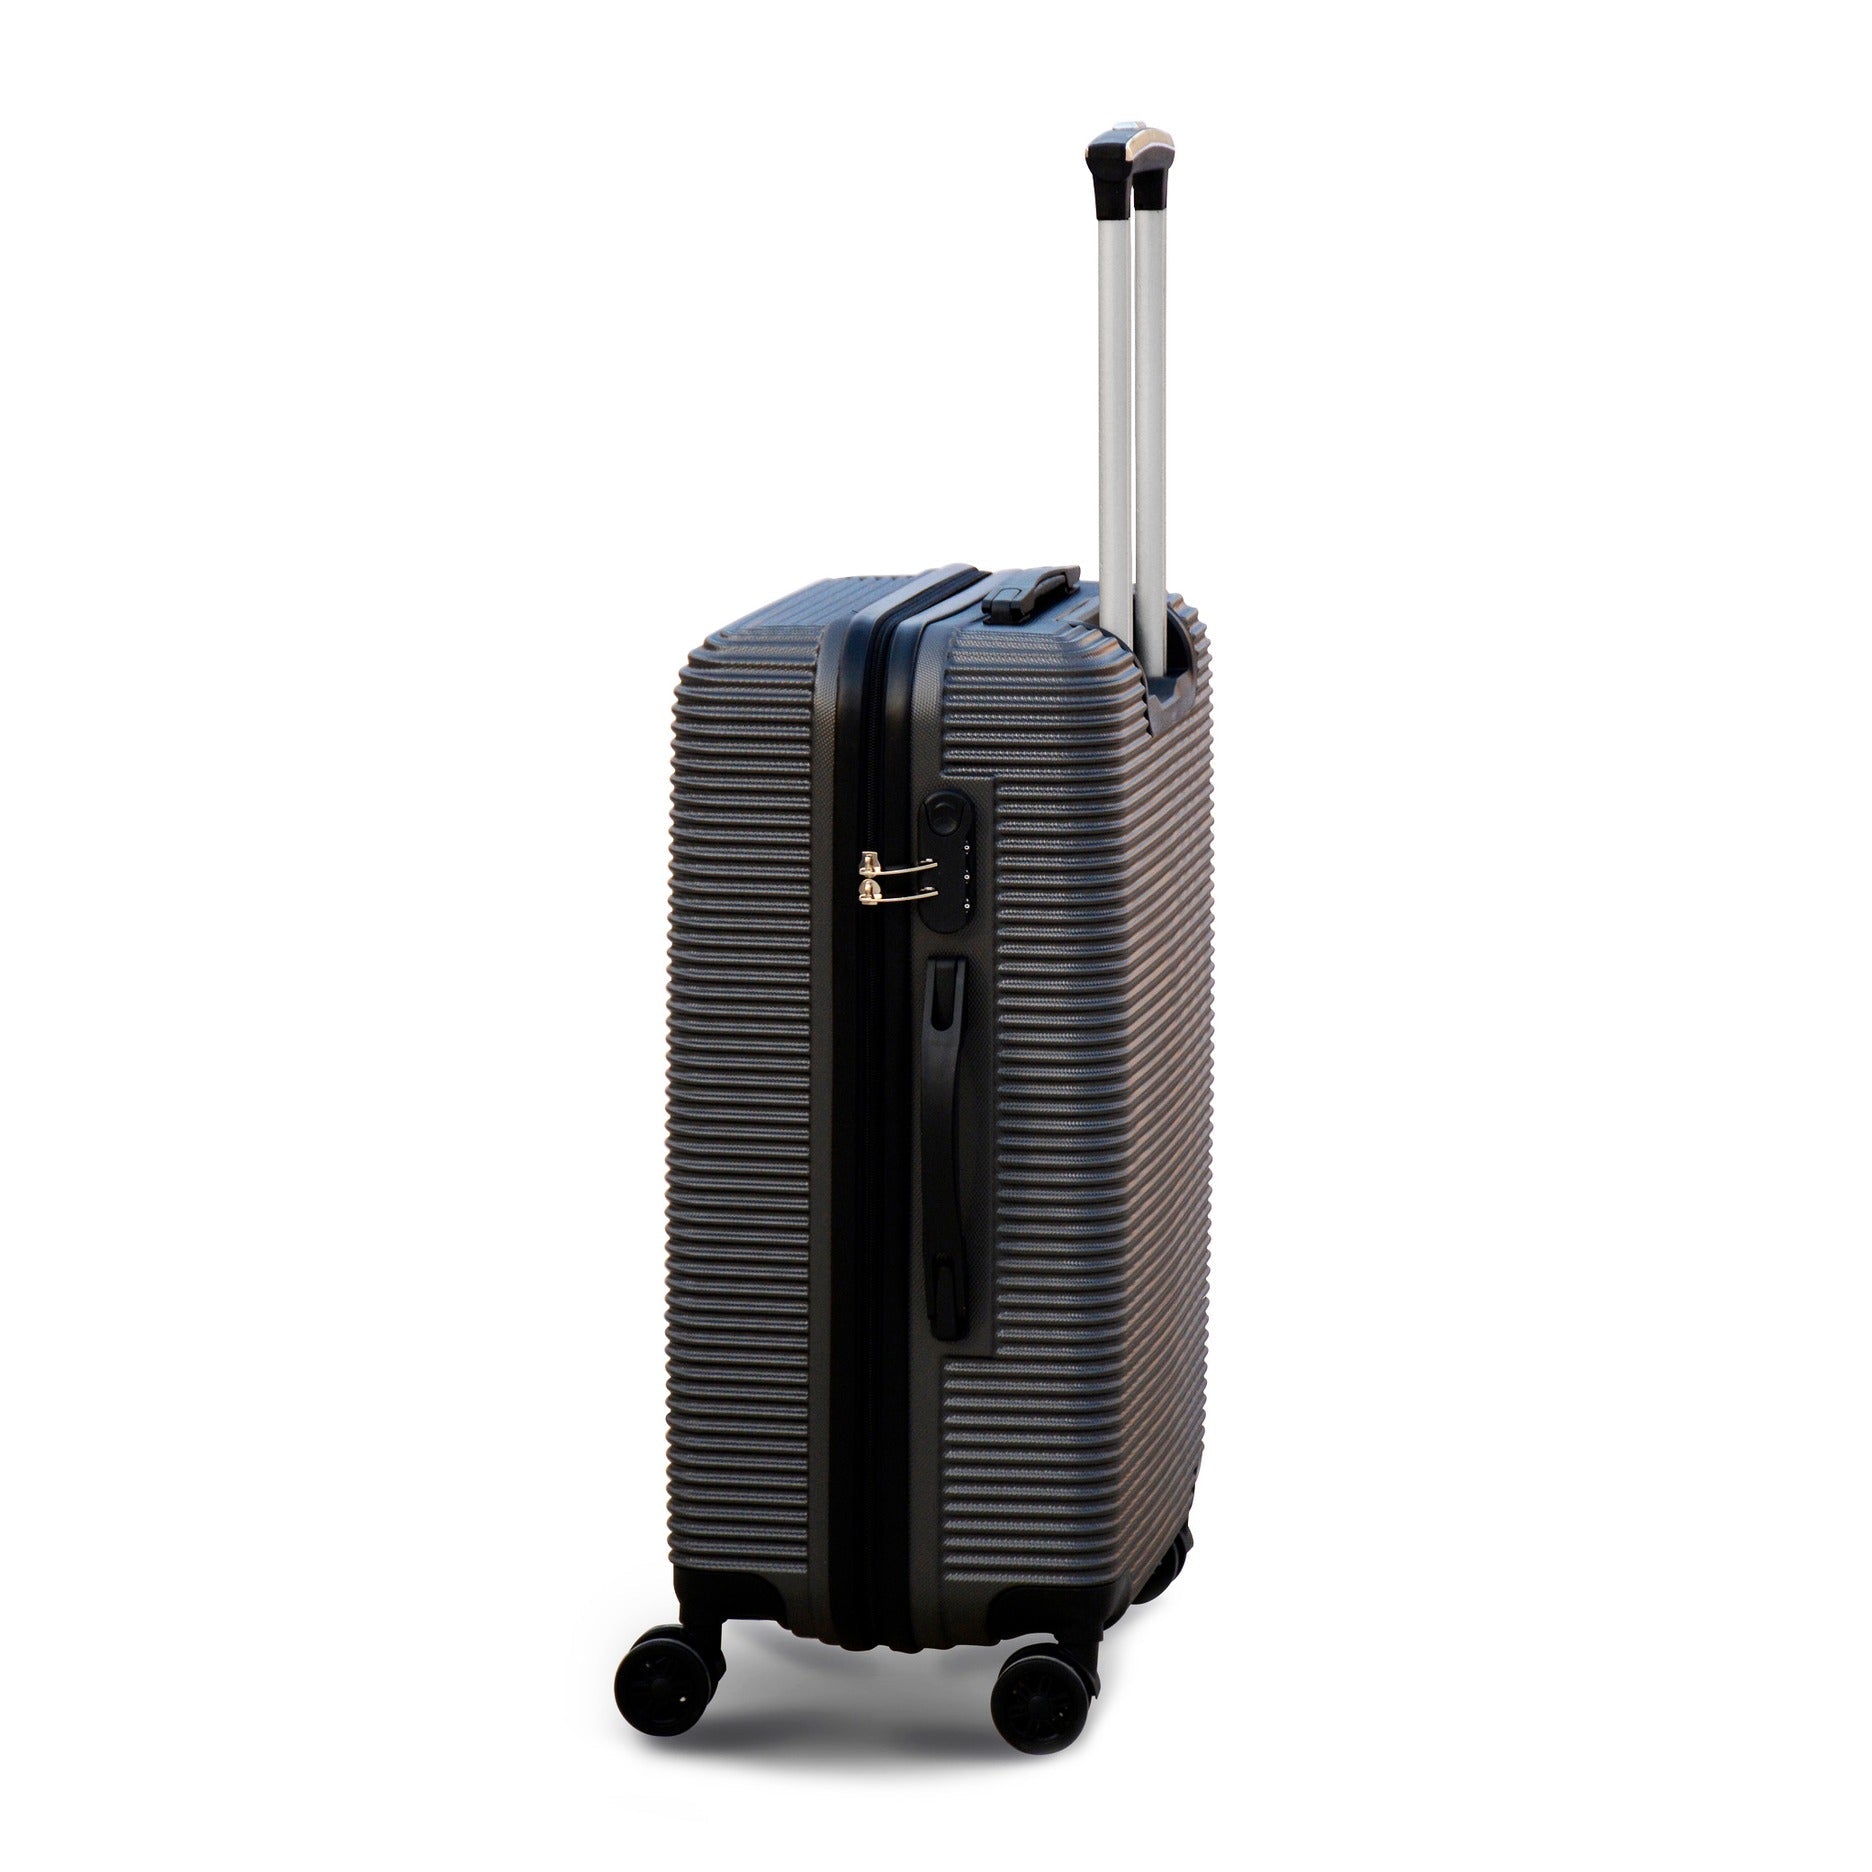 20" Dark Grey Colour JIAN ABS Line Luggage Lightweight Hard Case Carry On Trolley Bag with Spinner Wheel